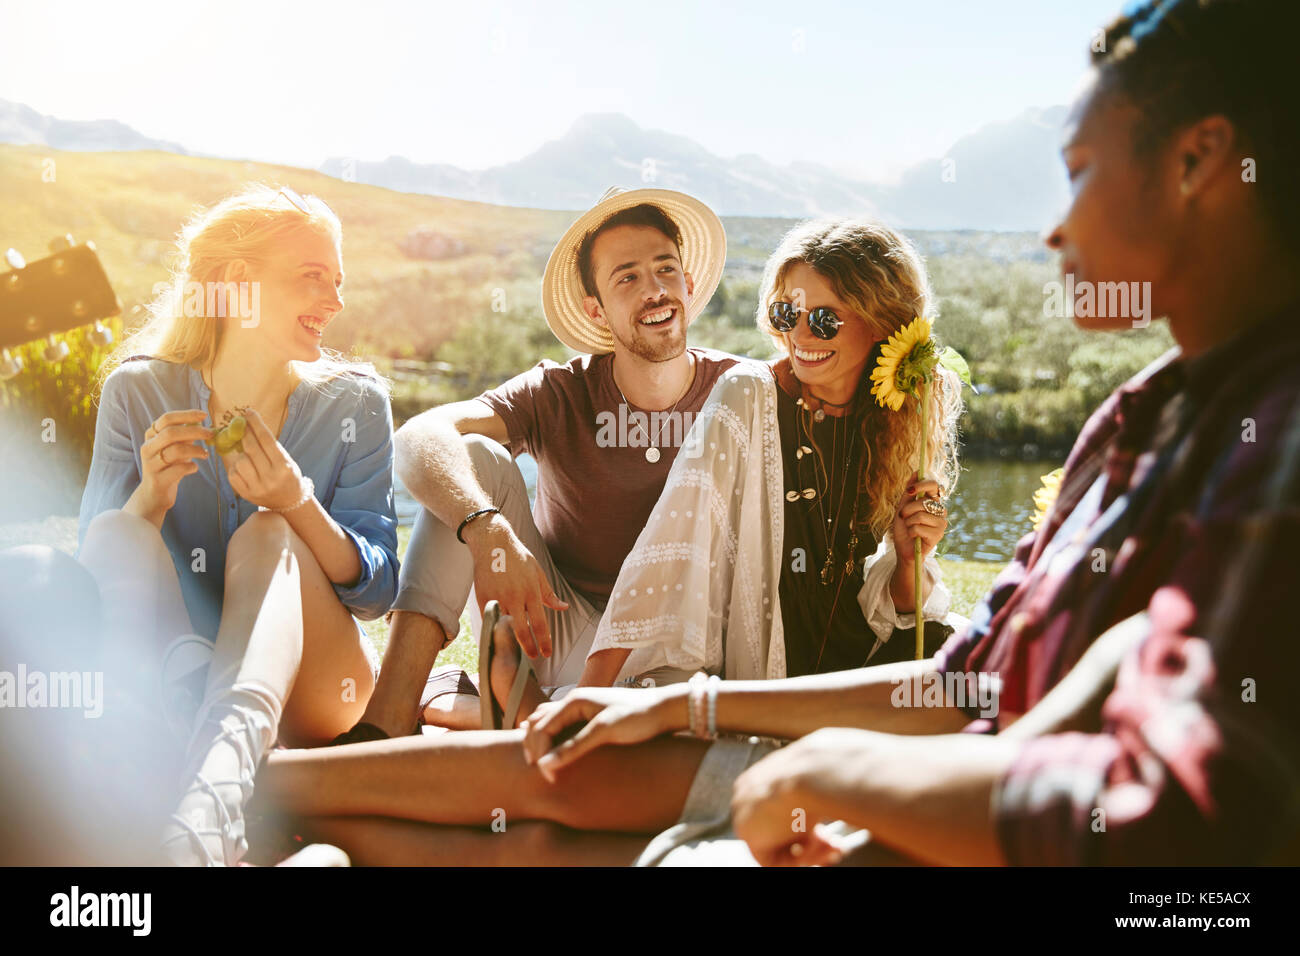 Smiling young friends enjoying picnic in sunny summer park Stock Photo